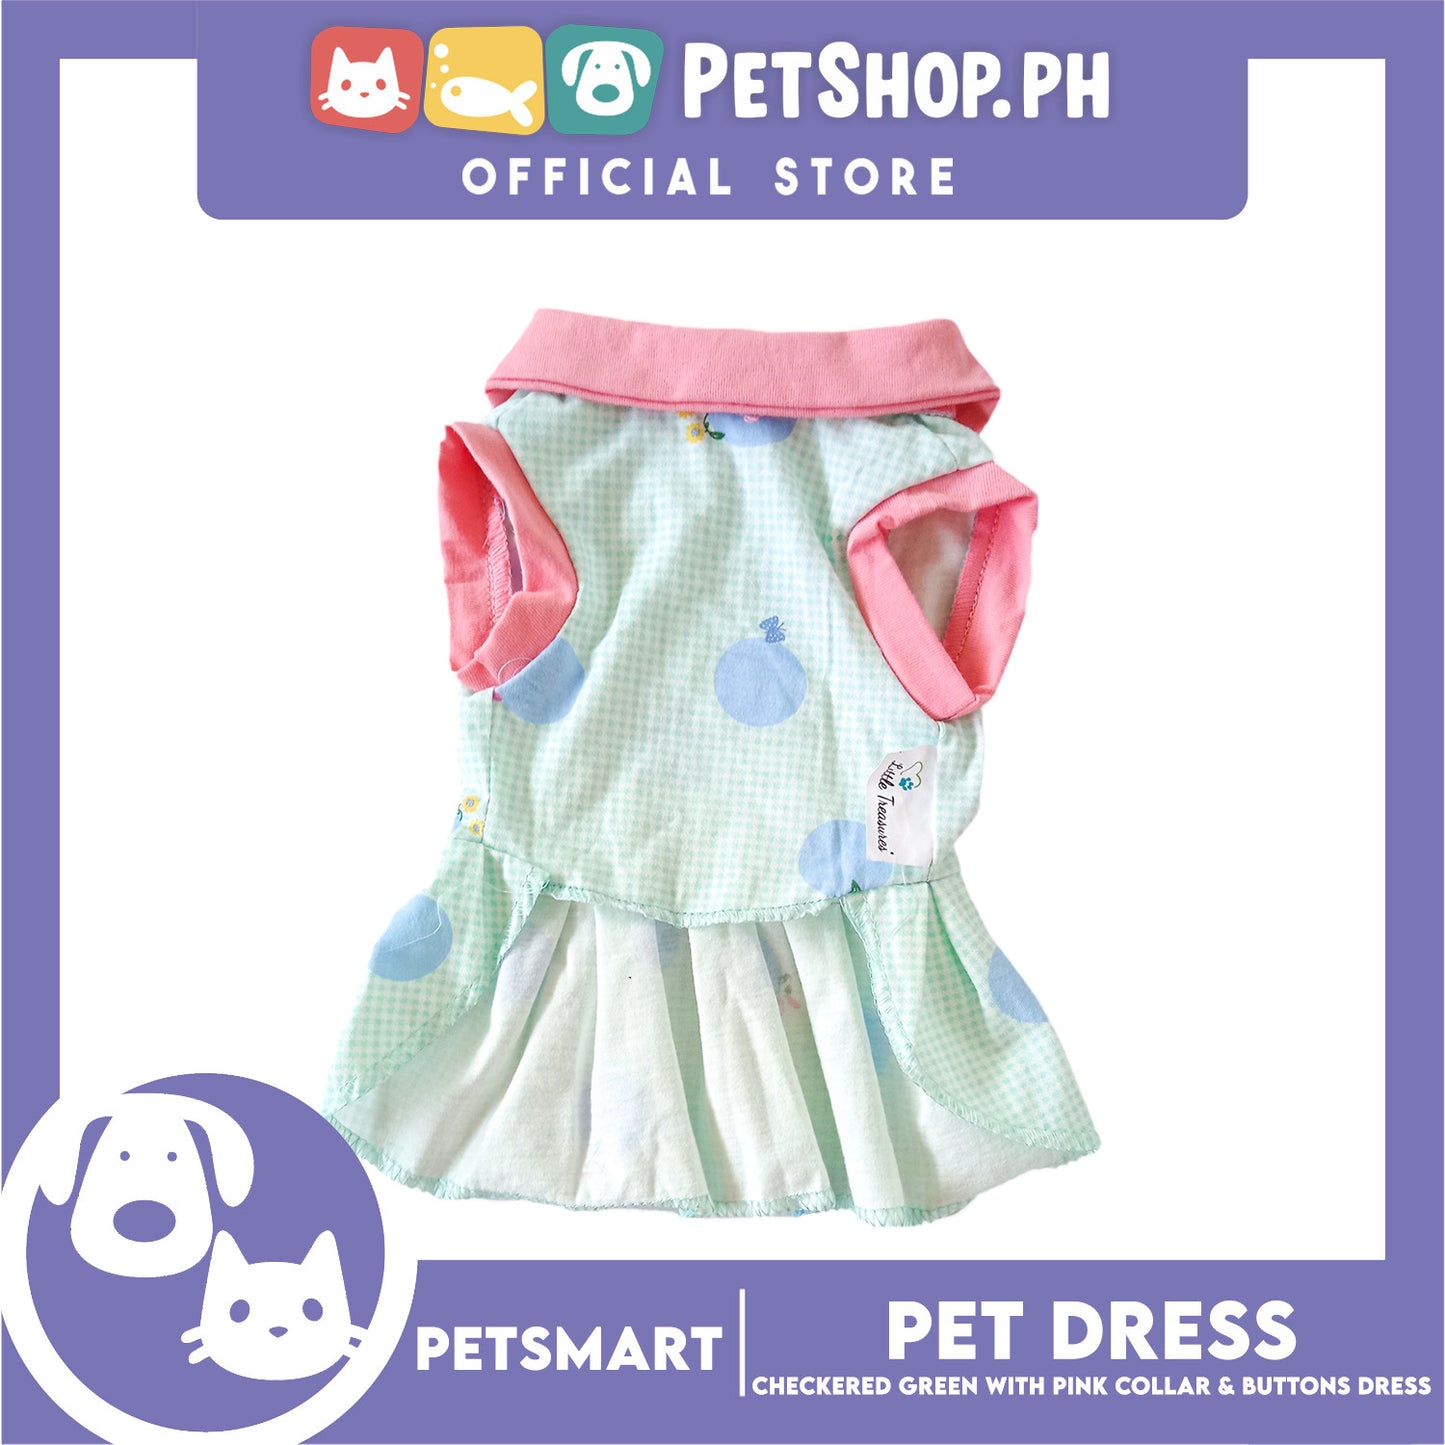 Pet Dress Checkered Design, Green with Pink Collar and Button Dress (Small) Perfect Fit for Dogs and Cats